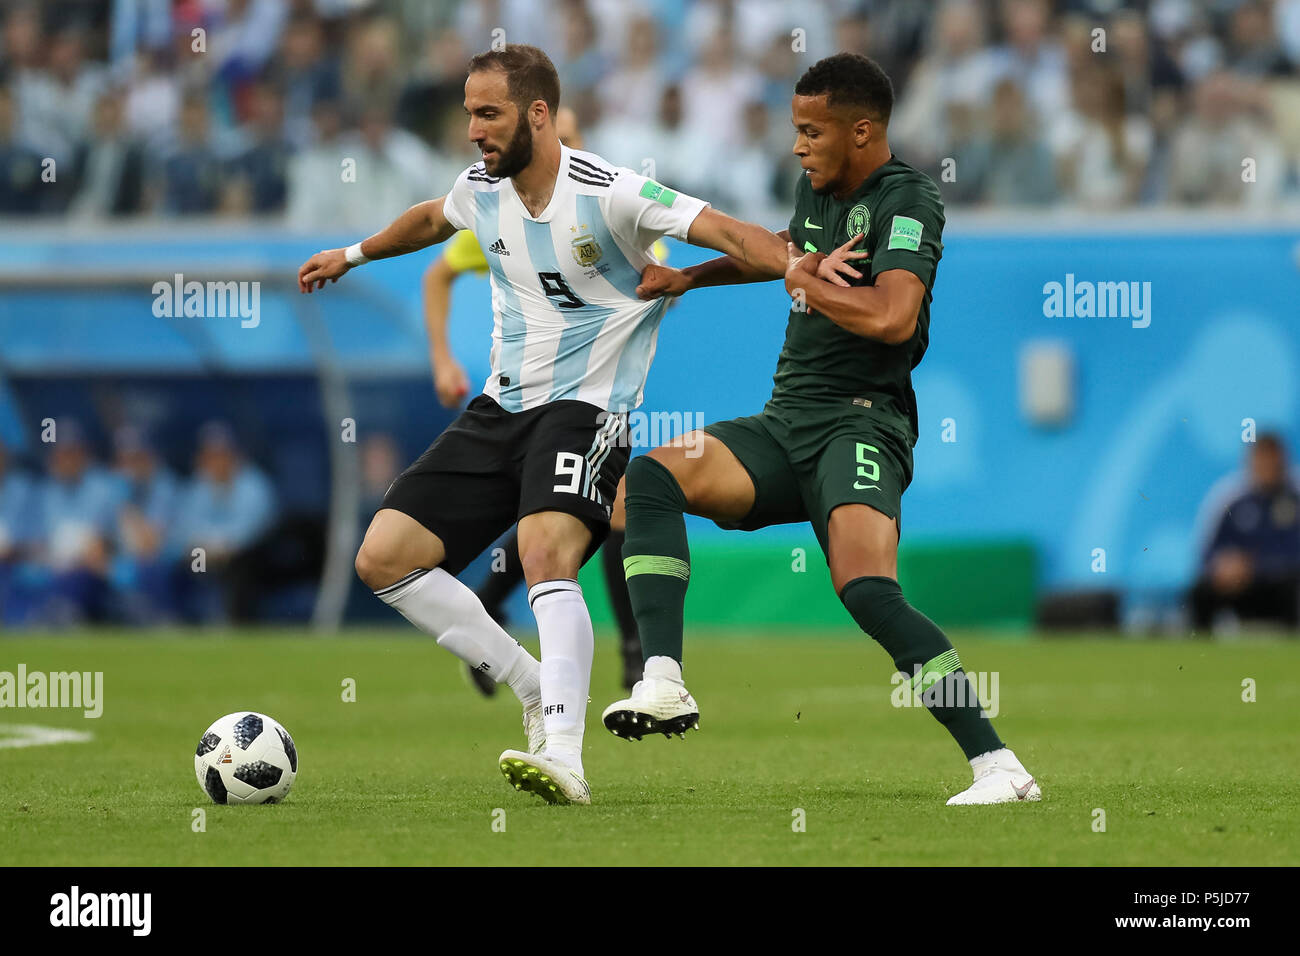 St Petersburg, Russia, 27 June 2018. Gonzalo Higuain of Argentina and William Troost-Ekong of Nigeria during the 2018 FIFA World Cup Group D match between Nigeria and Argentina at Saint Petersburg Stadium on June 26th 2018 in Saint Petersburg, Russia. (Photo by Daniel Chesterton/phcimages.com) Credit: PHC Images/Alamy Live News Stock Photo